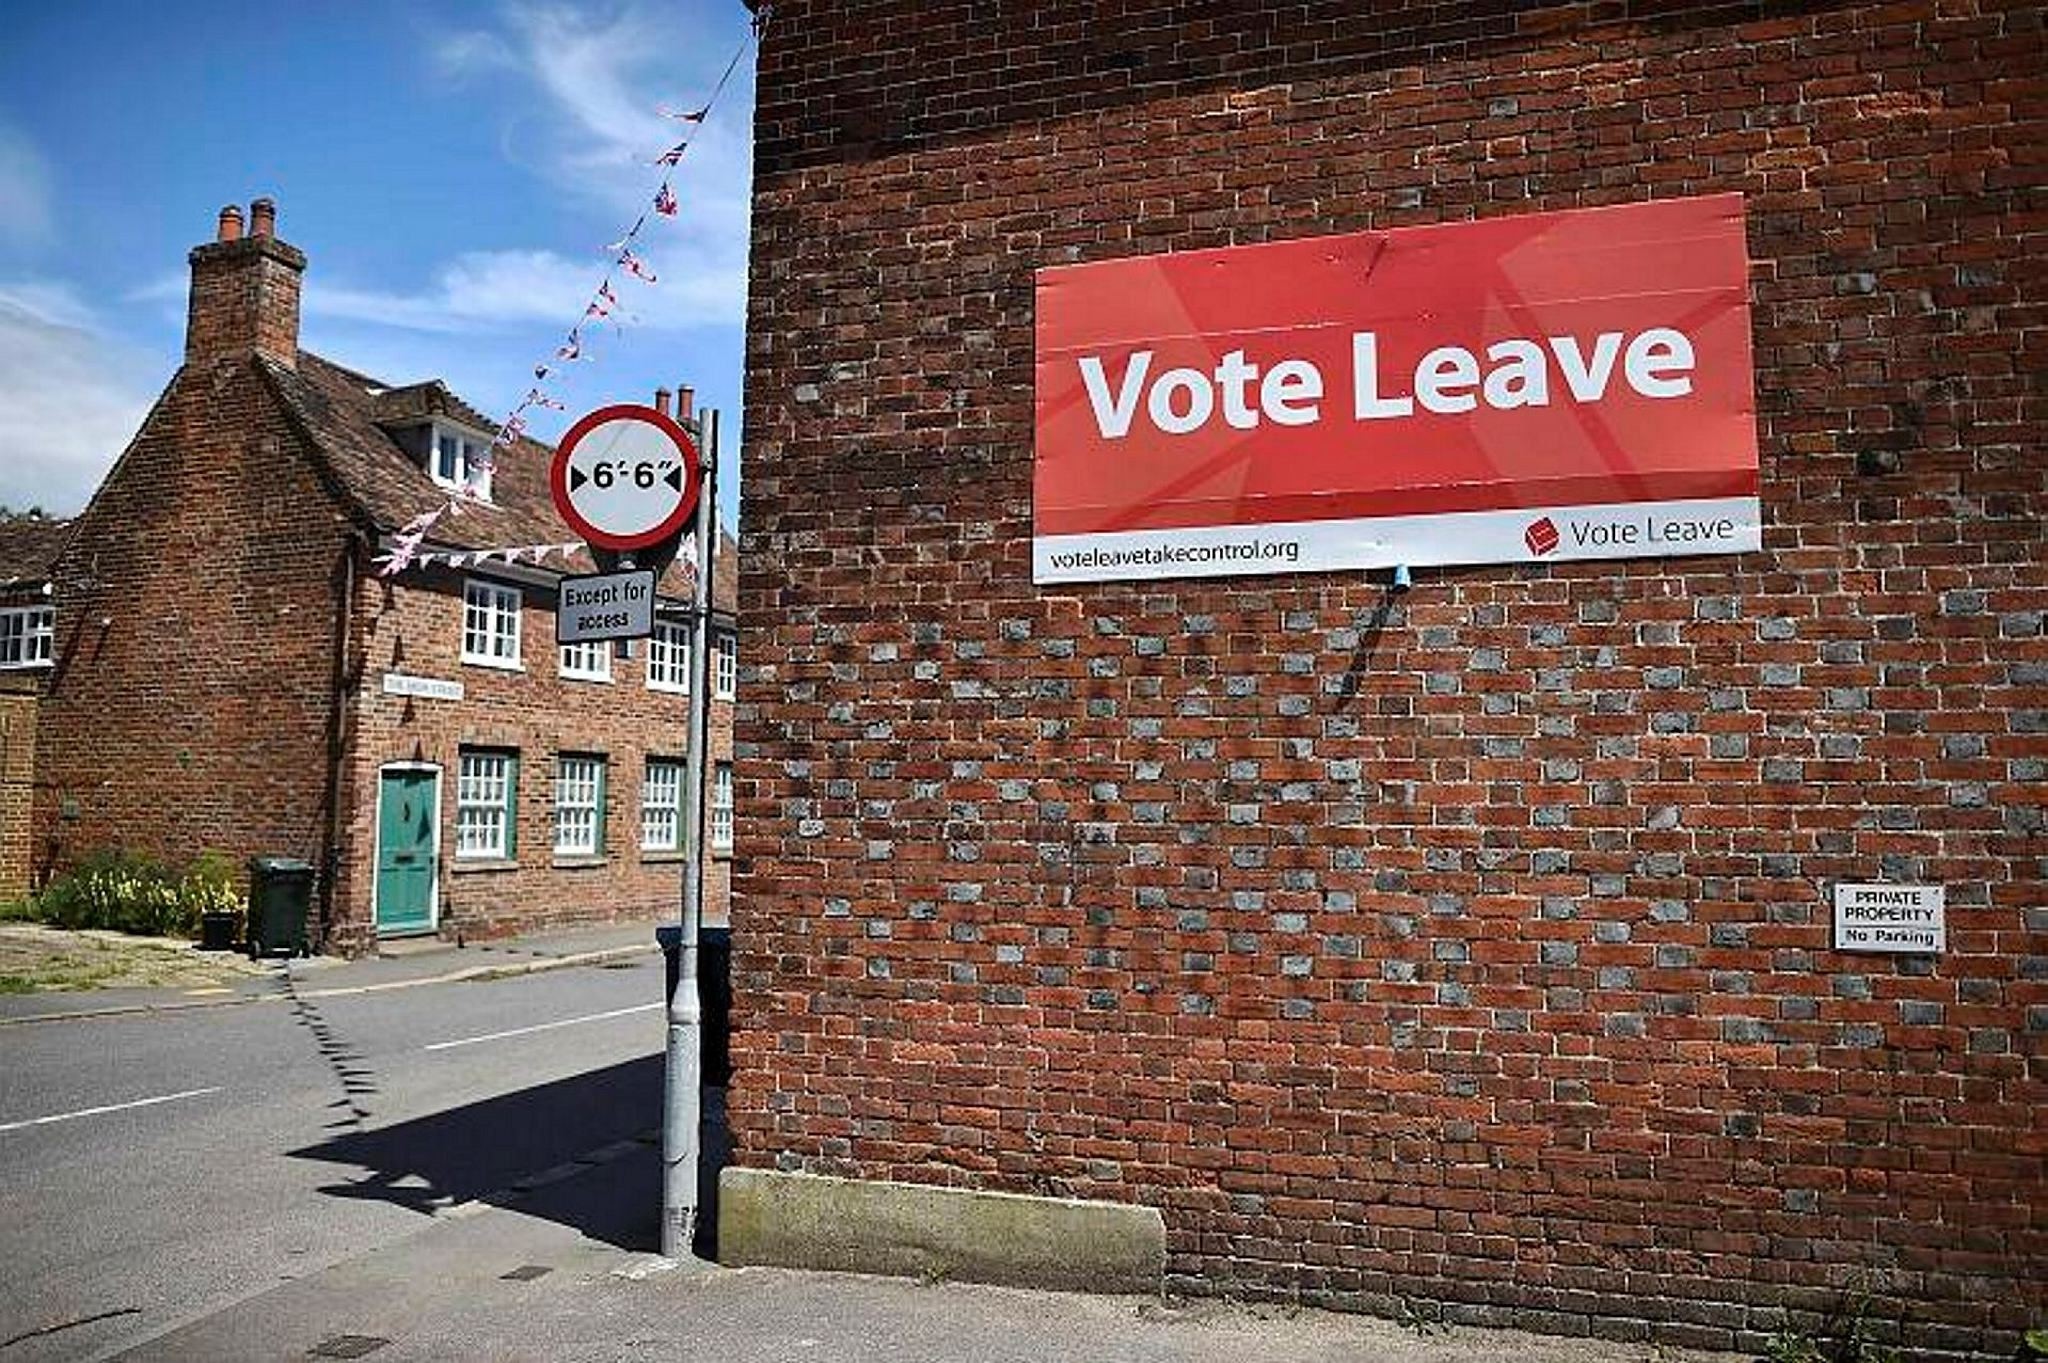 A 'Vote Leave' sign is seen on the side of a building in Charing on June 16, 2016 urging people to vote for Brexit in the upcoming EU referendum. (AFP Photo)